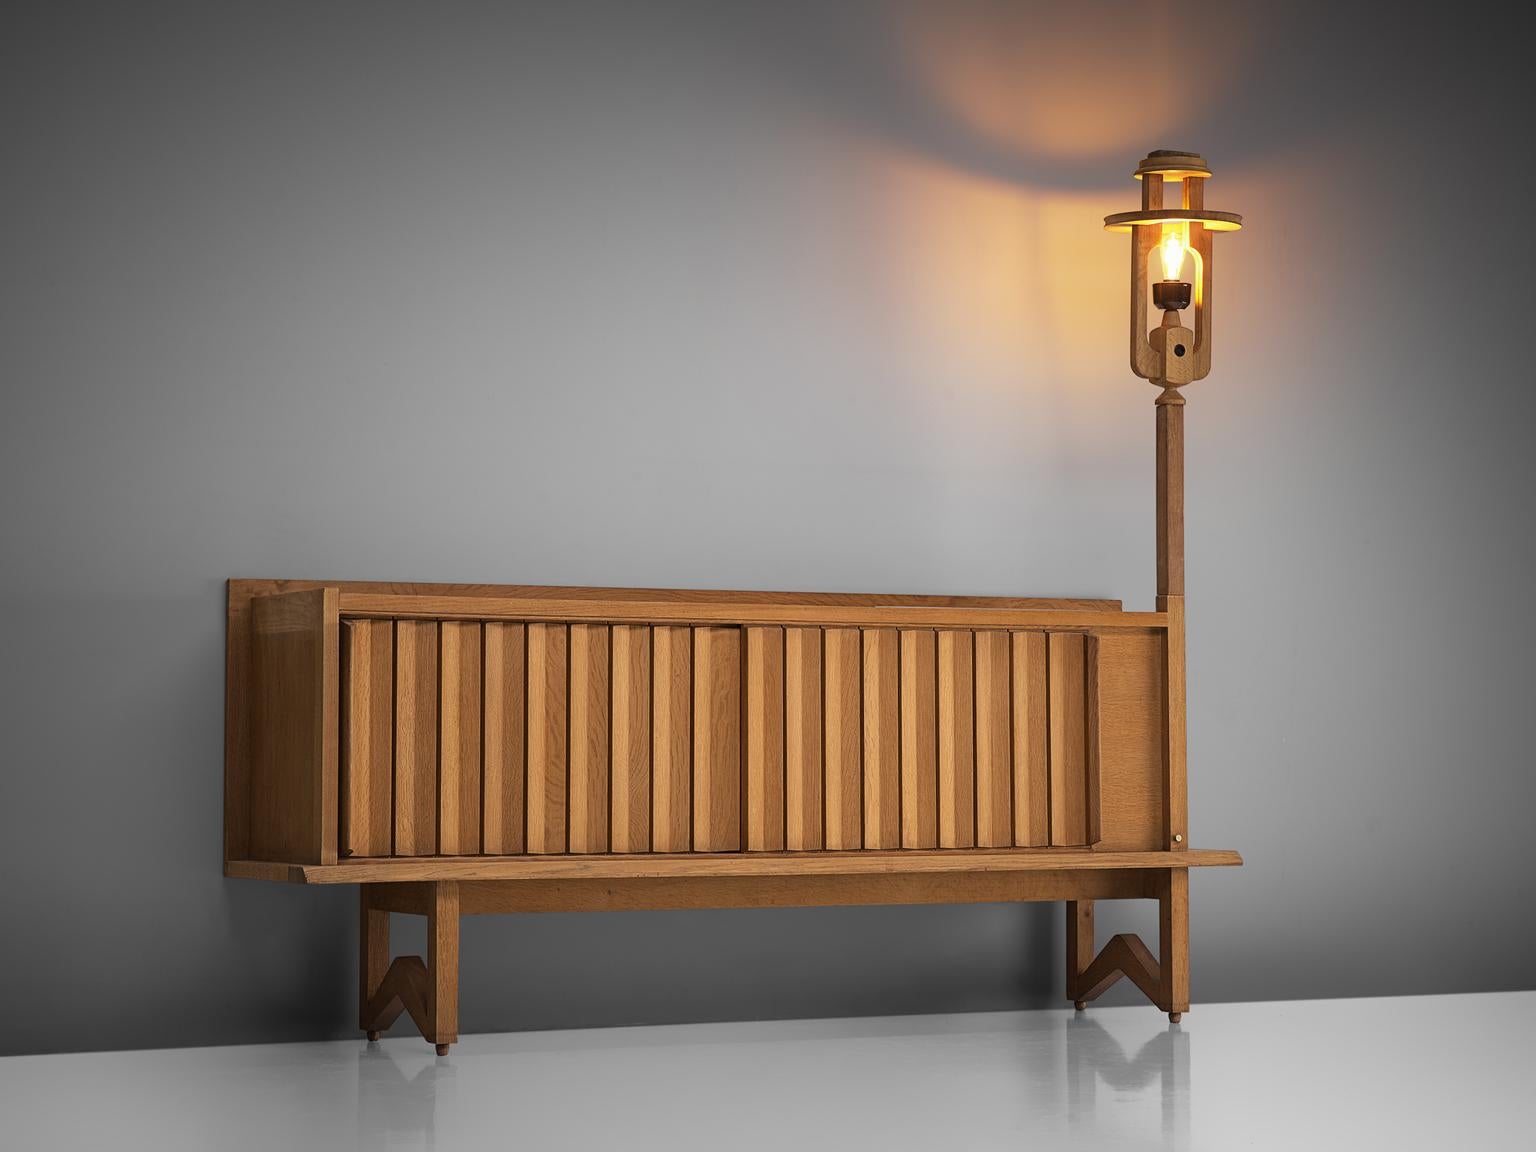 Guillerme et Chambron, credenza with lantern, solid oak and stone, France, 1960s.

This sideboard holds the characteristics of the French designer duo Guillerme & Chambron. The base has typical legs and provides a floating appearance to the